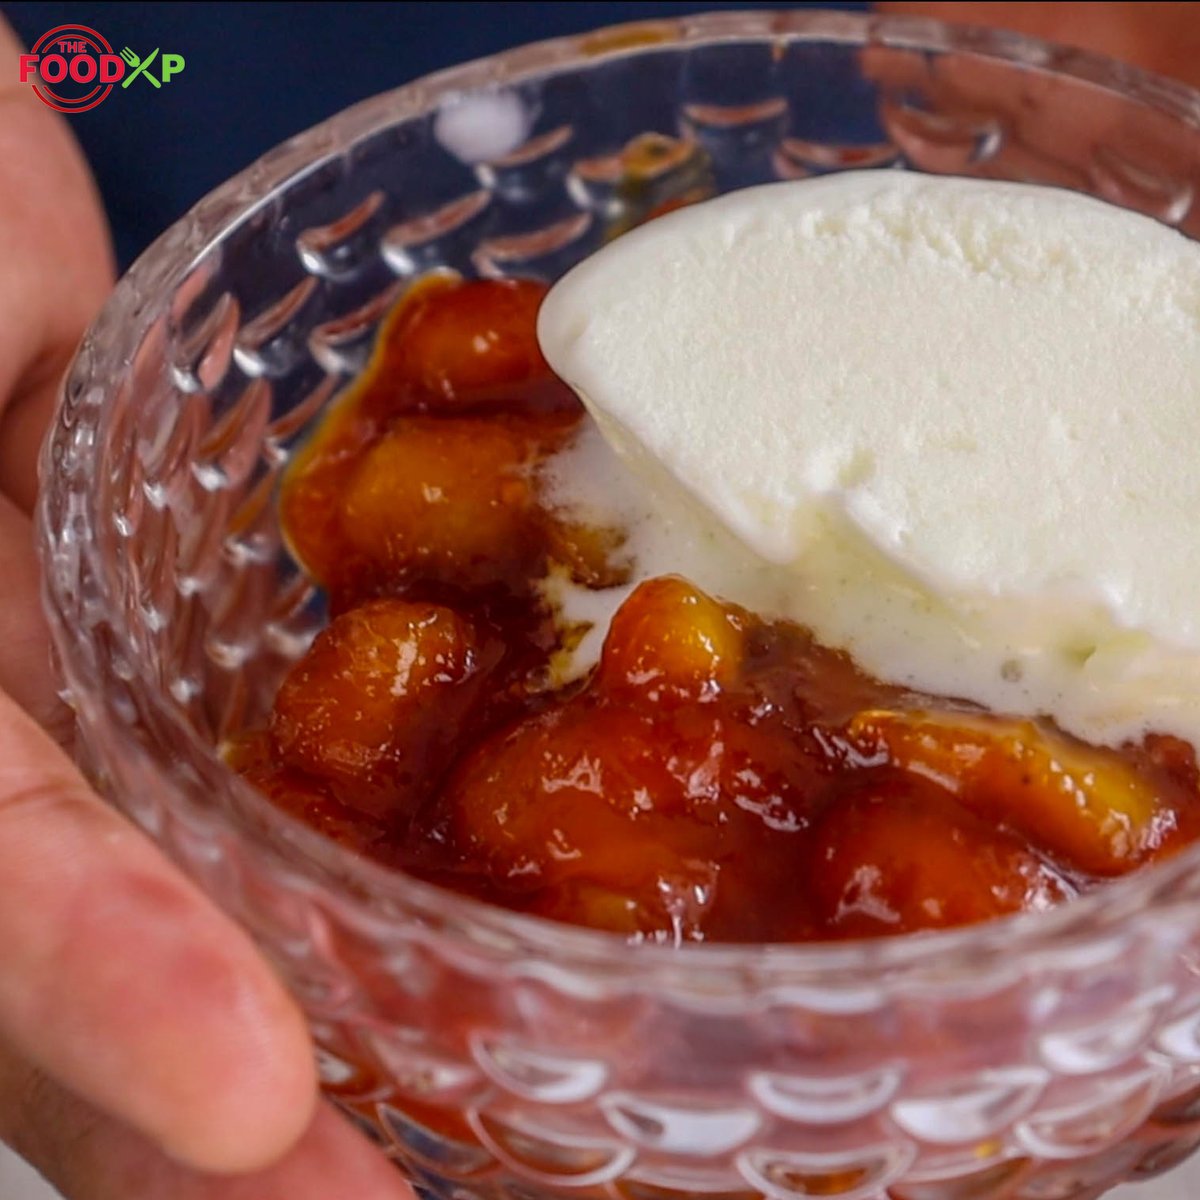 To make Gordon Ramsay’s hot bananas, slather the bananas in caramelized sugar, chili flakes, and rum. Watch and learn the whole recipe, just click on the YouTube link below!
https://t.co/c7m2rksVt2

#GorodnRamsay #HotBananas #Banana #Recipe https://t.co/PjFfmsqXMm